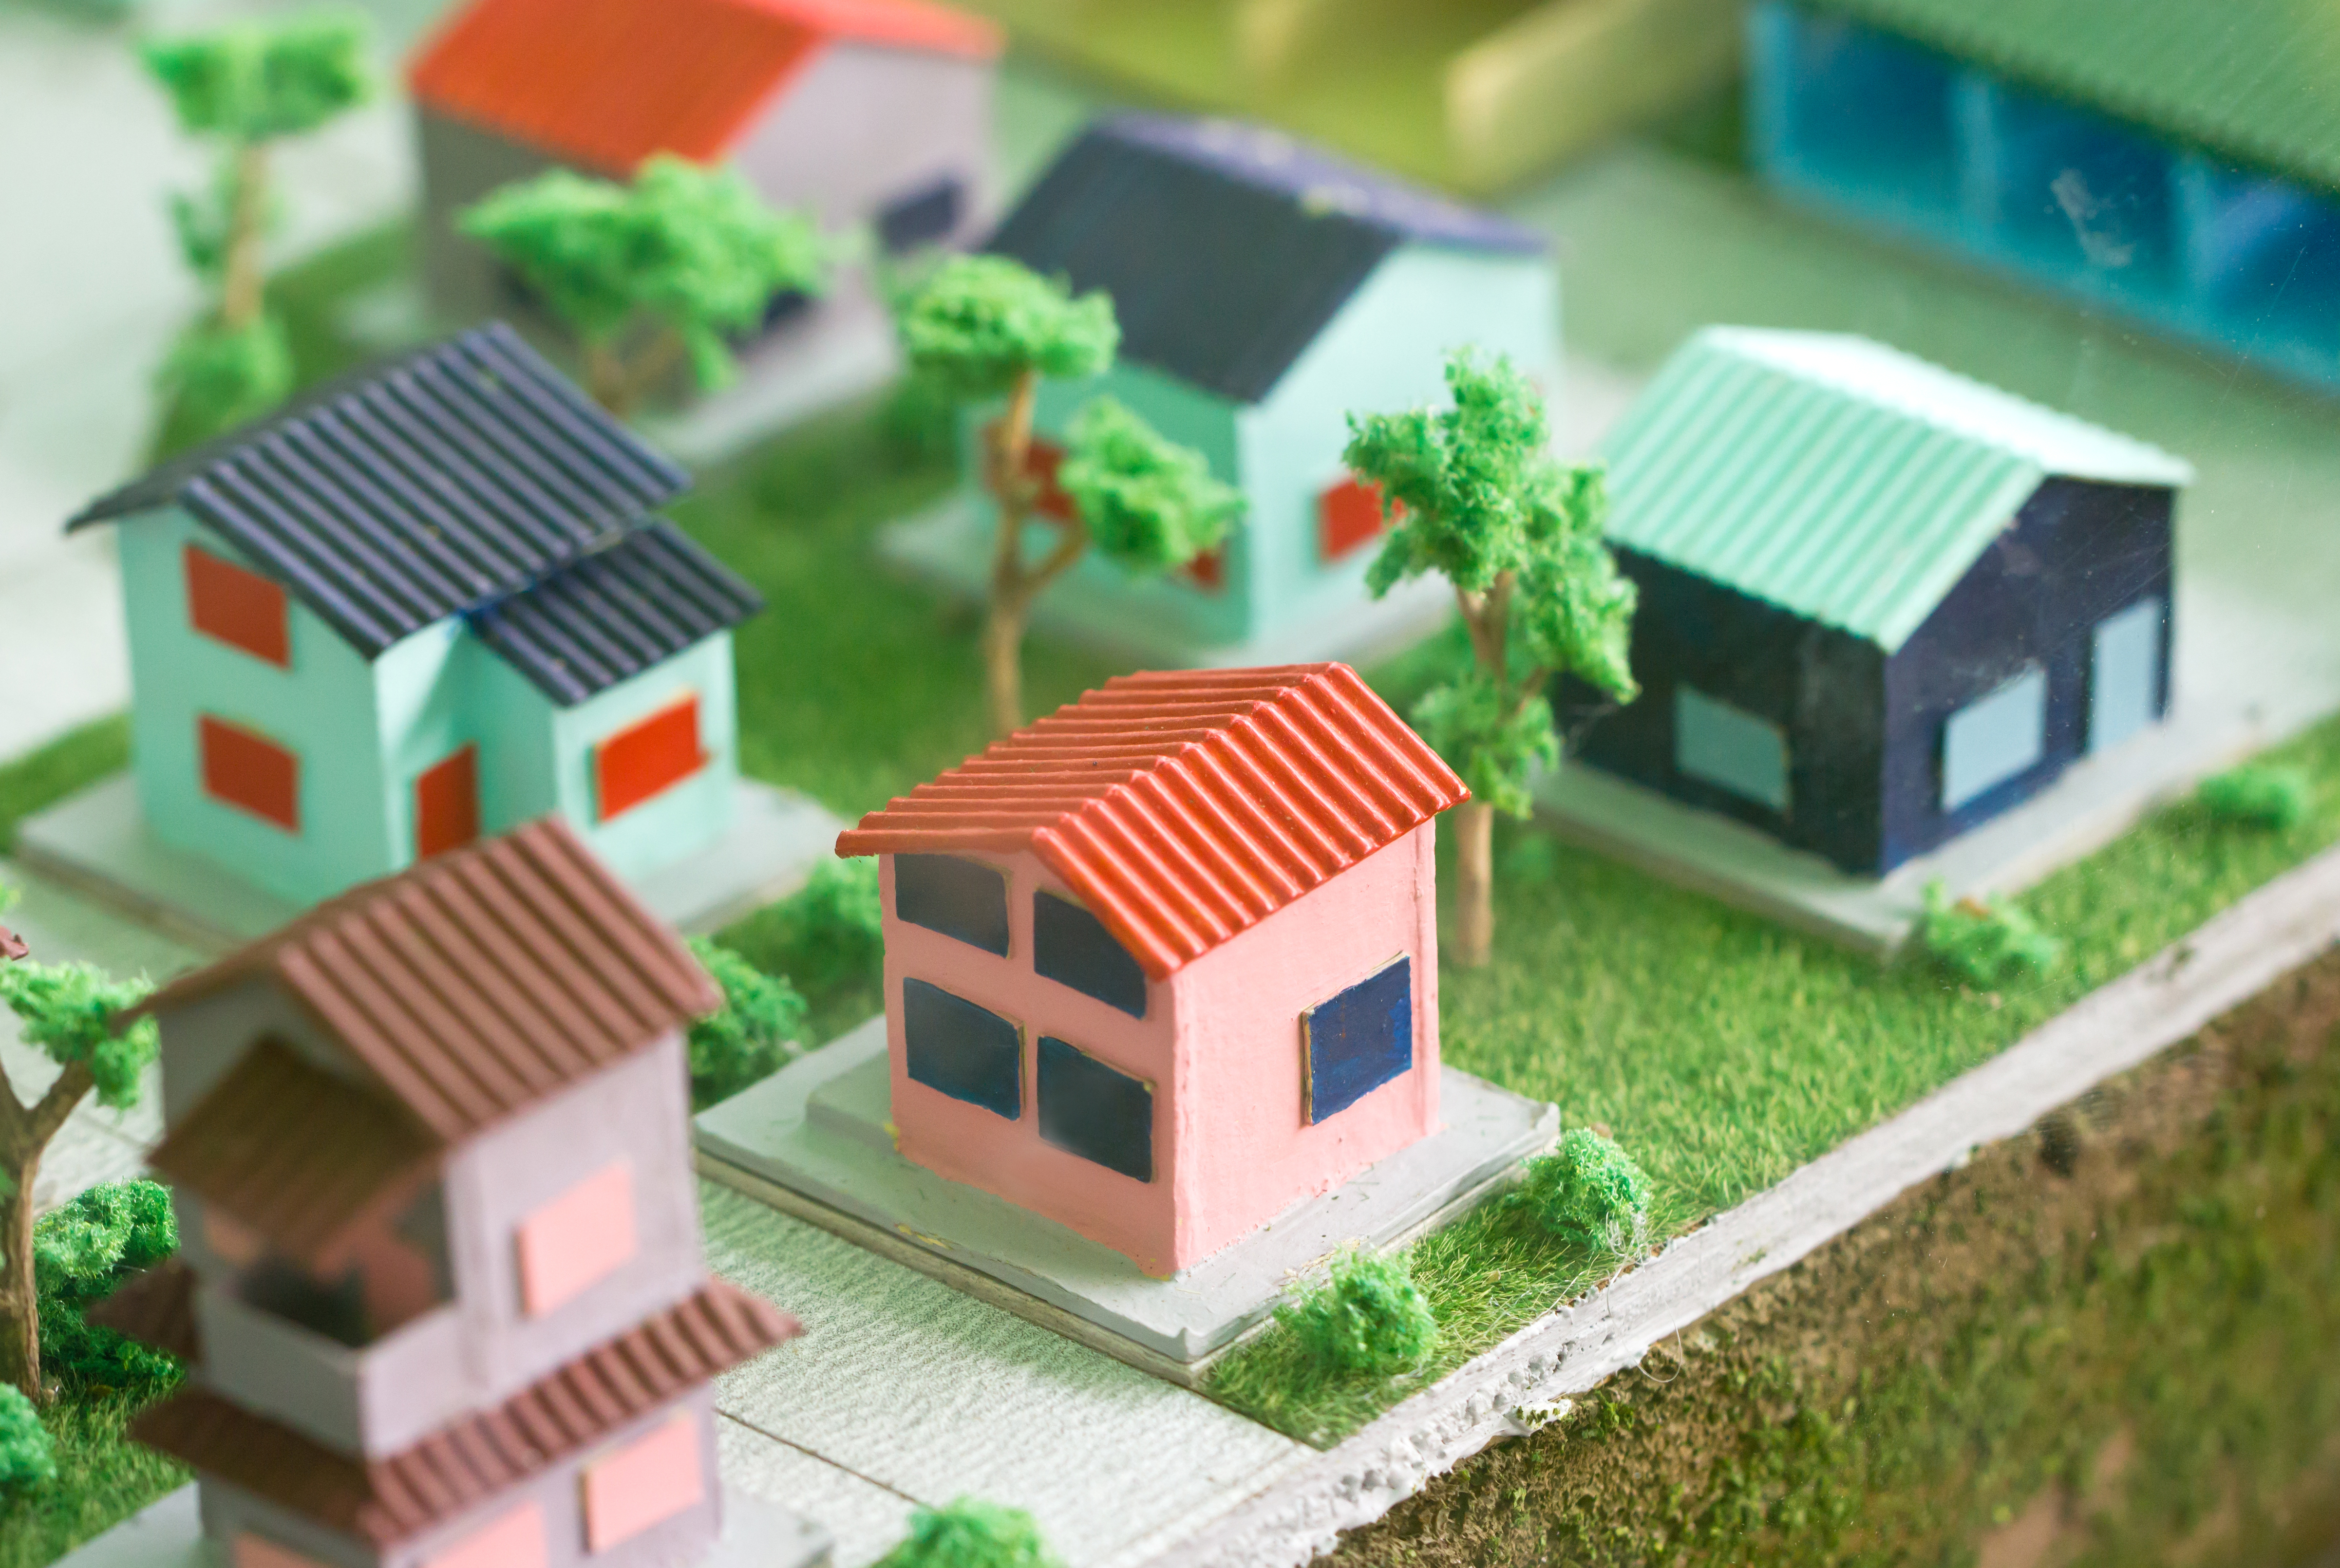 Small Homes And Trees Models On Grass.